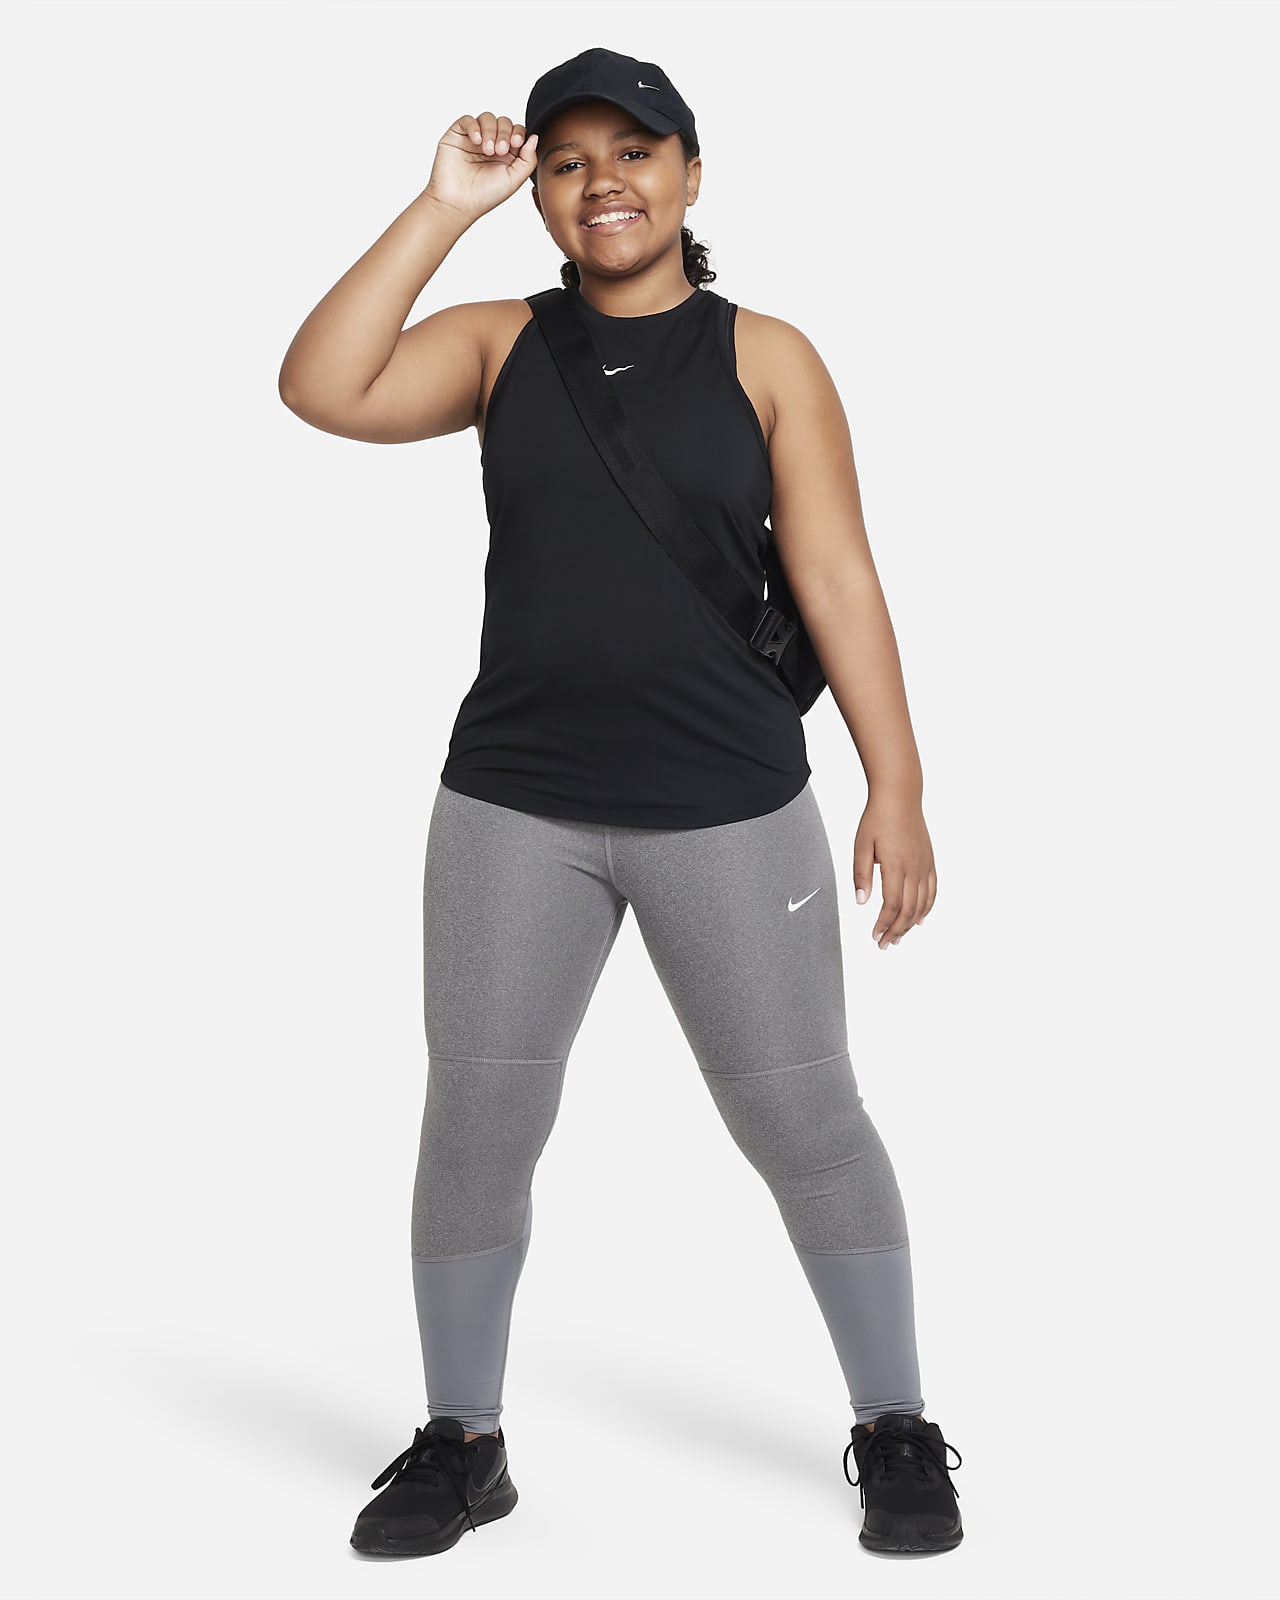 Pro Dri-FIT Leggings - Teens by Nike Online, THE ICONIC